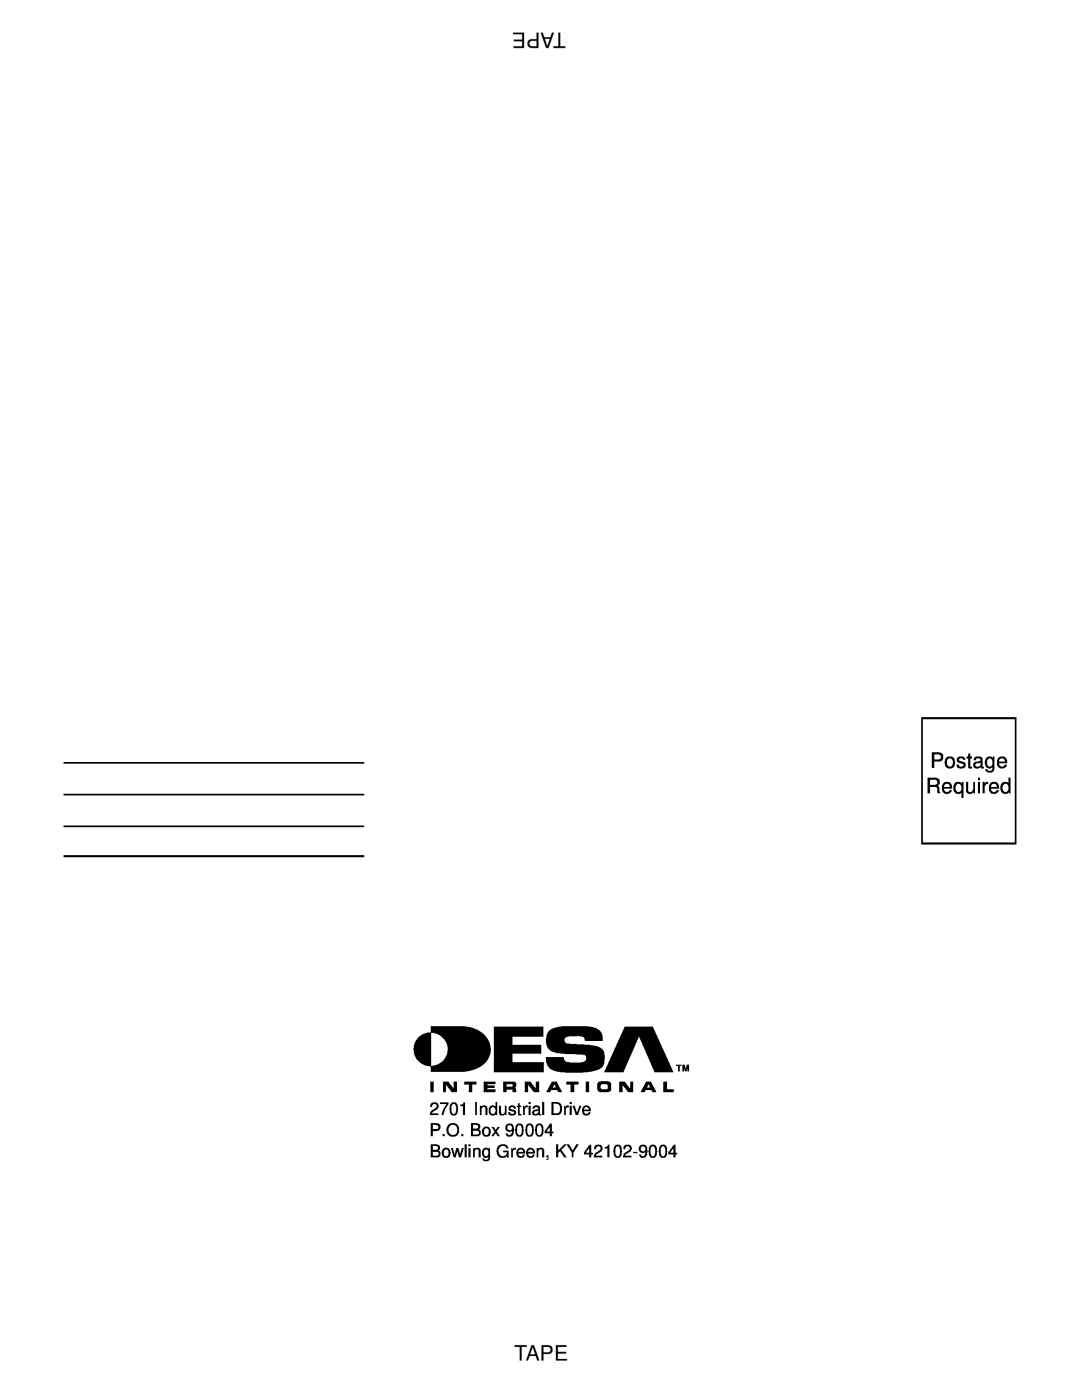 Desa EFS33PR installation manual Tape, Postage Required, Industrial Drive P.O. Box Bowling Green, KY 